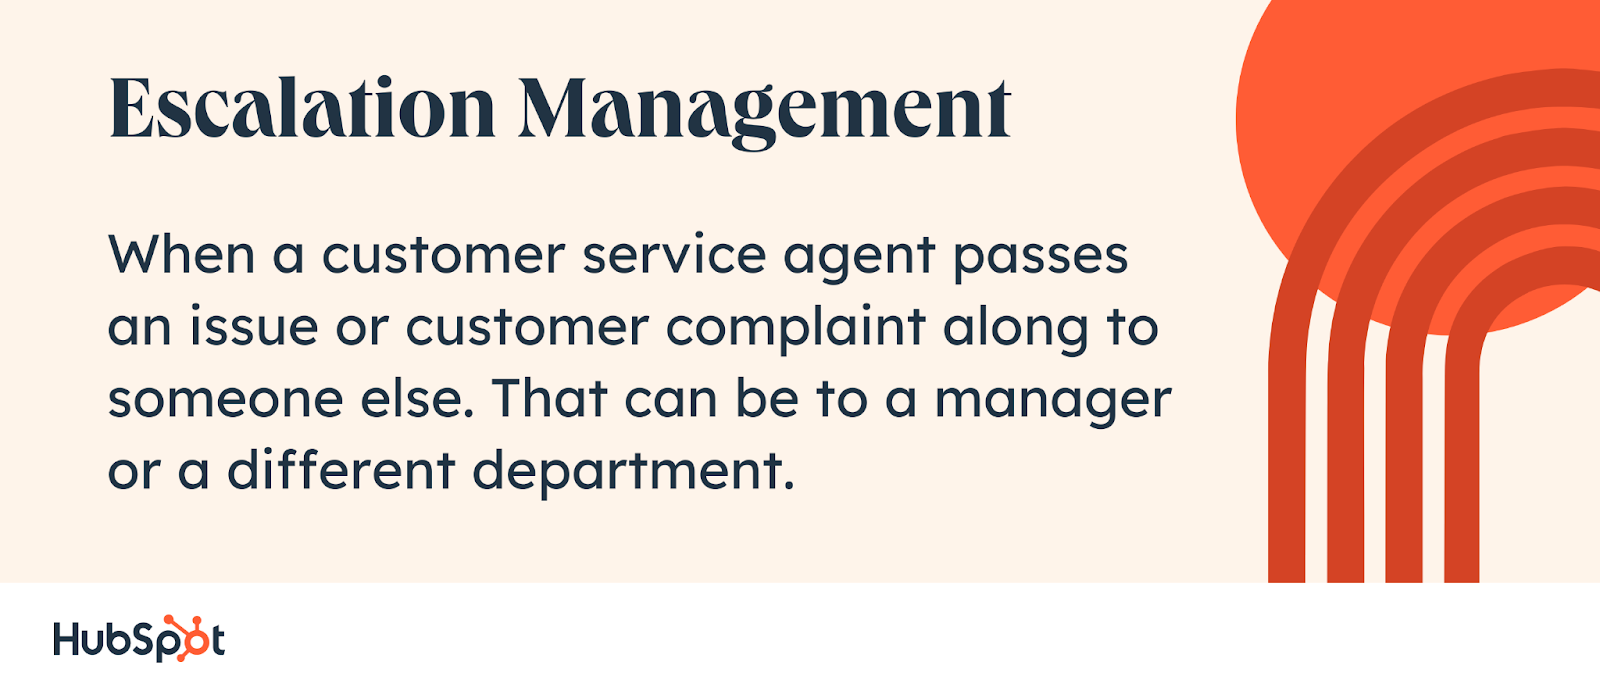 what is escalation management, when a customer service agent passes an issue or customer complaint along to someone else. That can be to a manager or a different department.